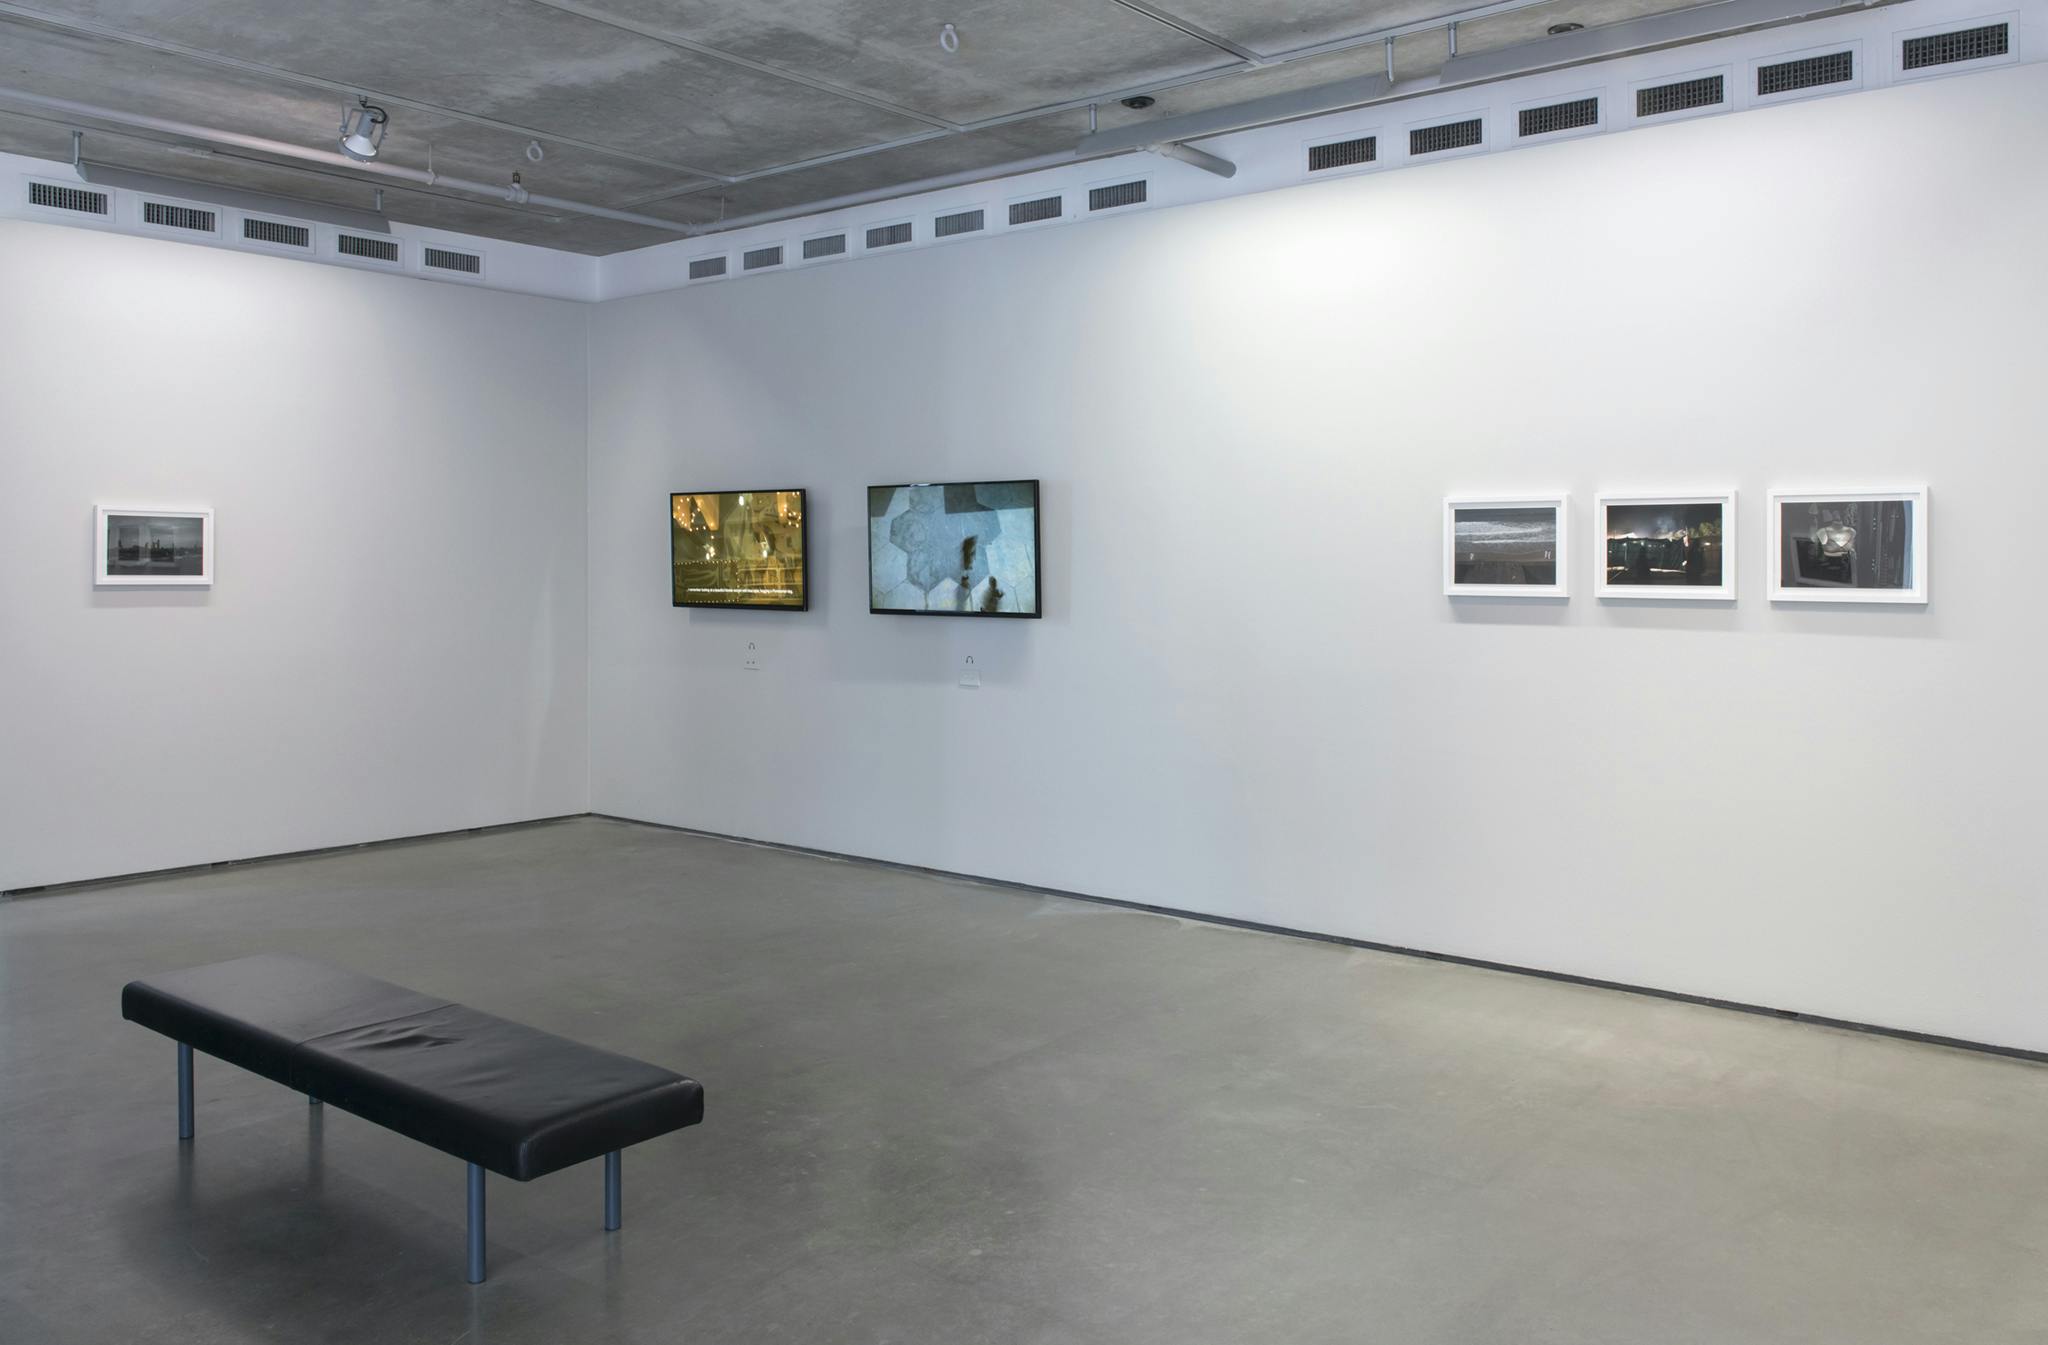 Four framed photographs and two monitors hang on two walls. The left wall has one photograph and the right wall has three photographs and two monitors. One bench sits in the middle of the room.